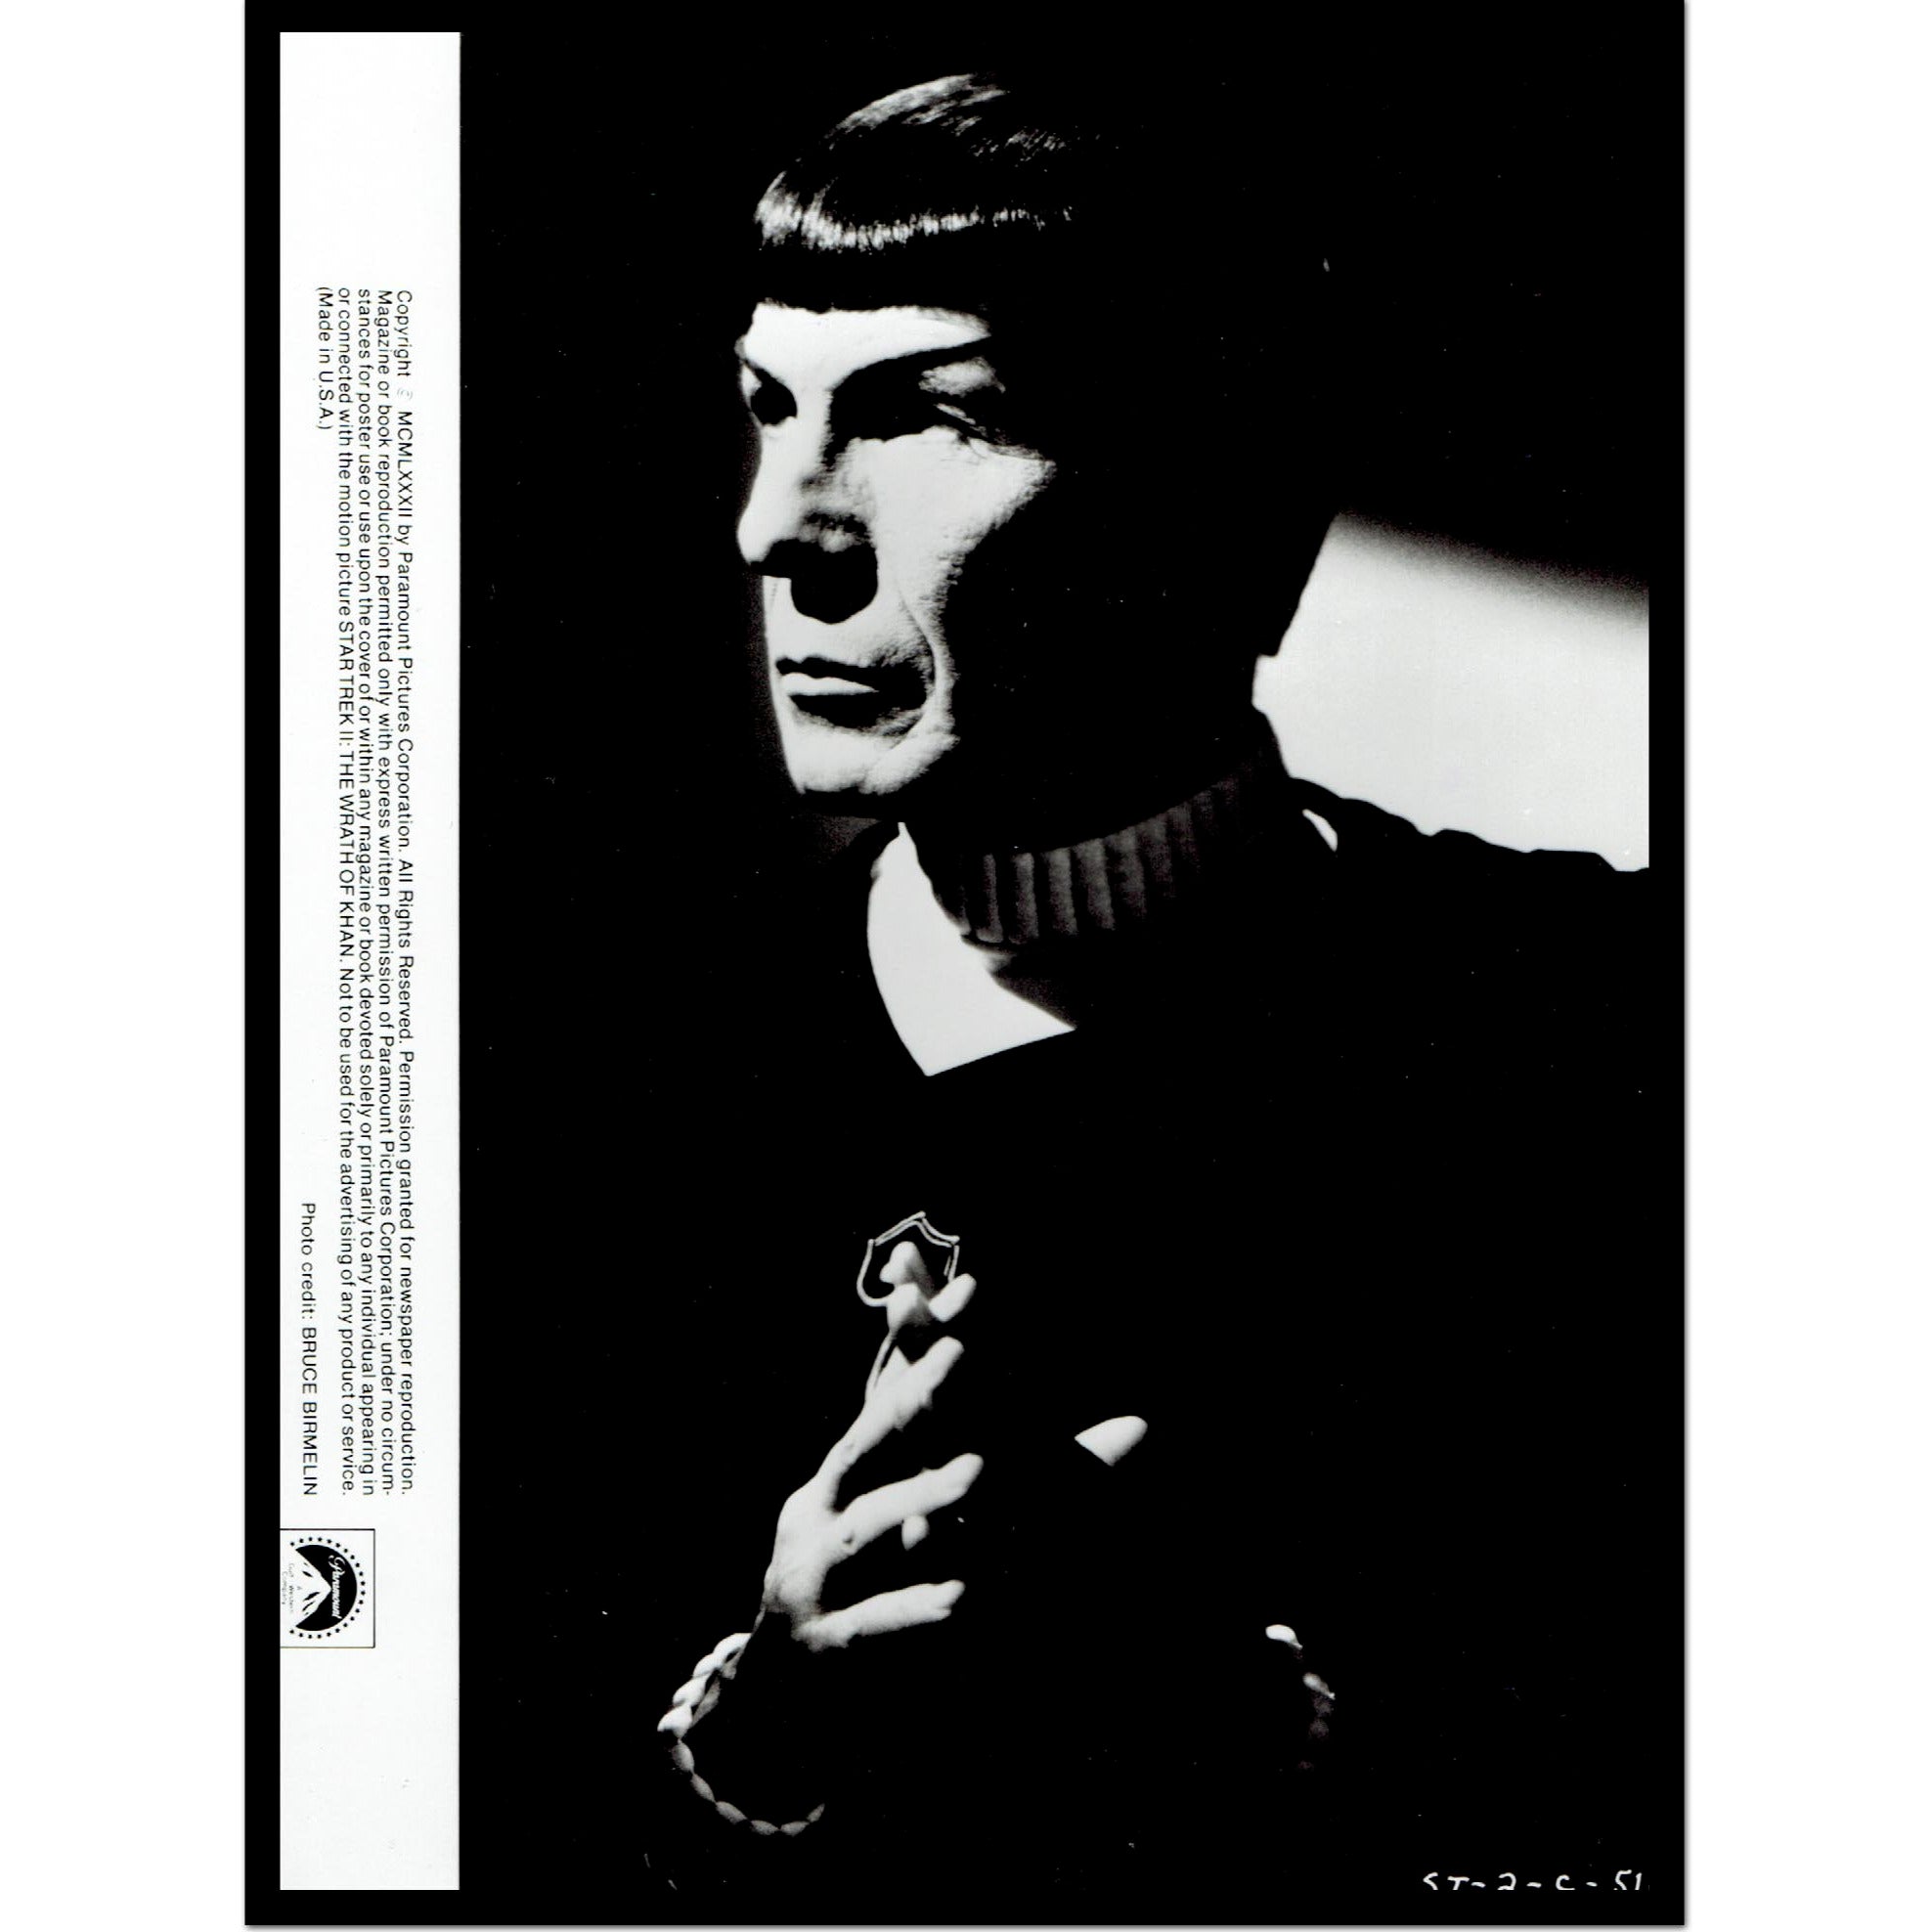 Star Trek and Mr. Spock Unsigned Photos from Leonard Nimoy's Personal Collection